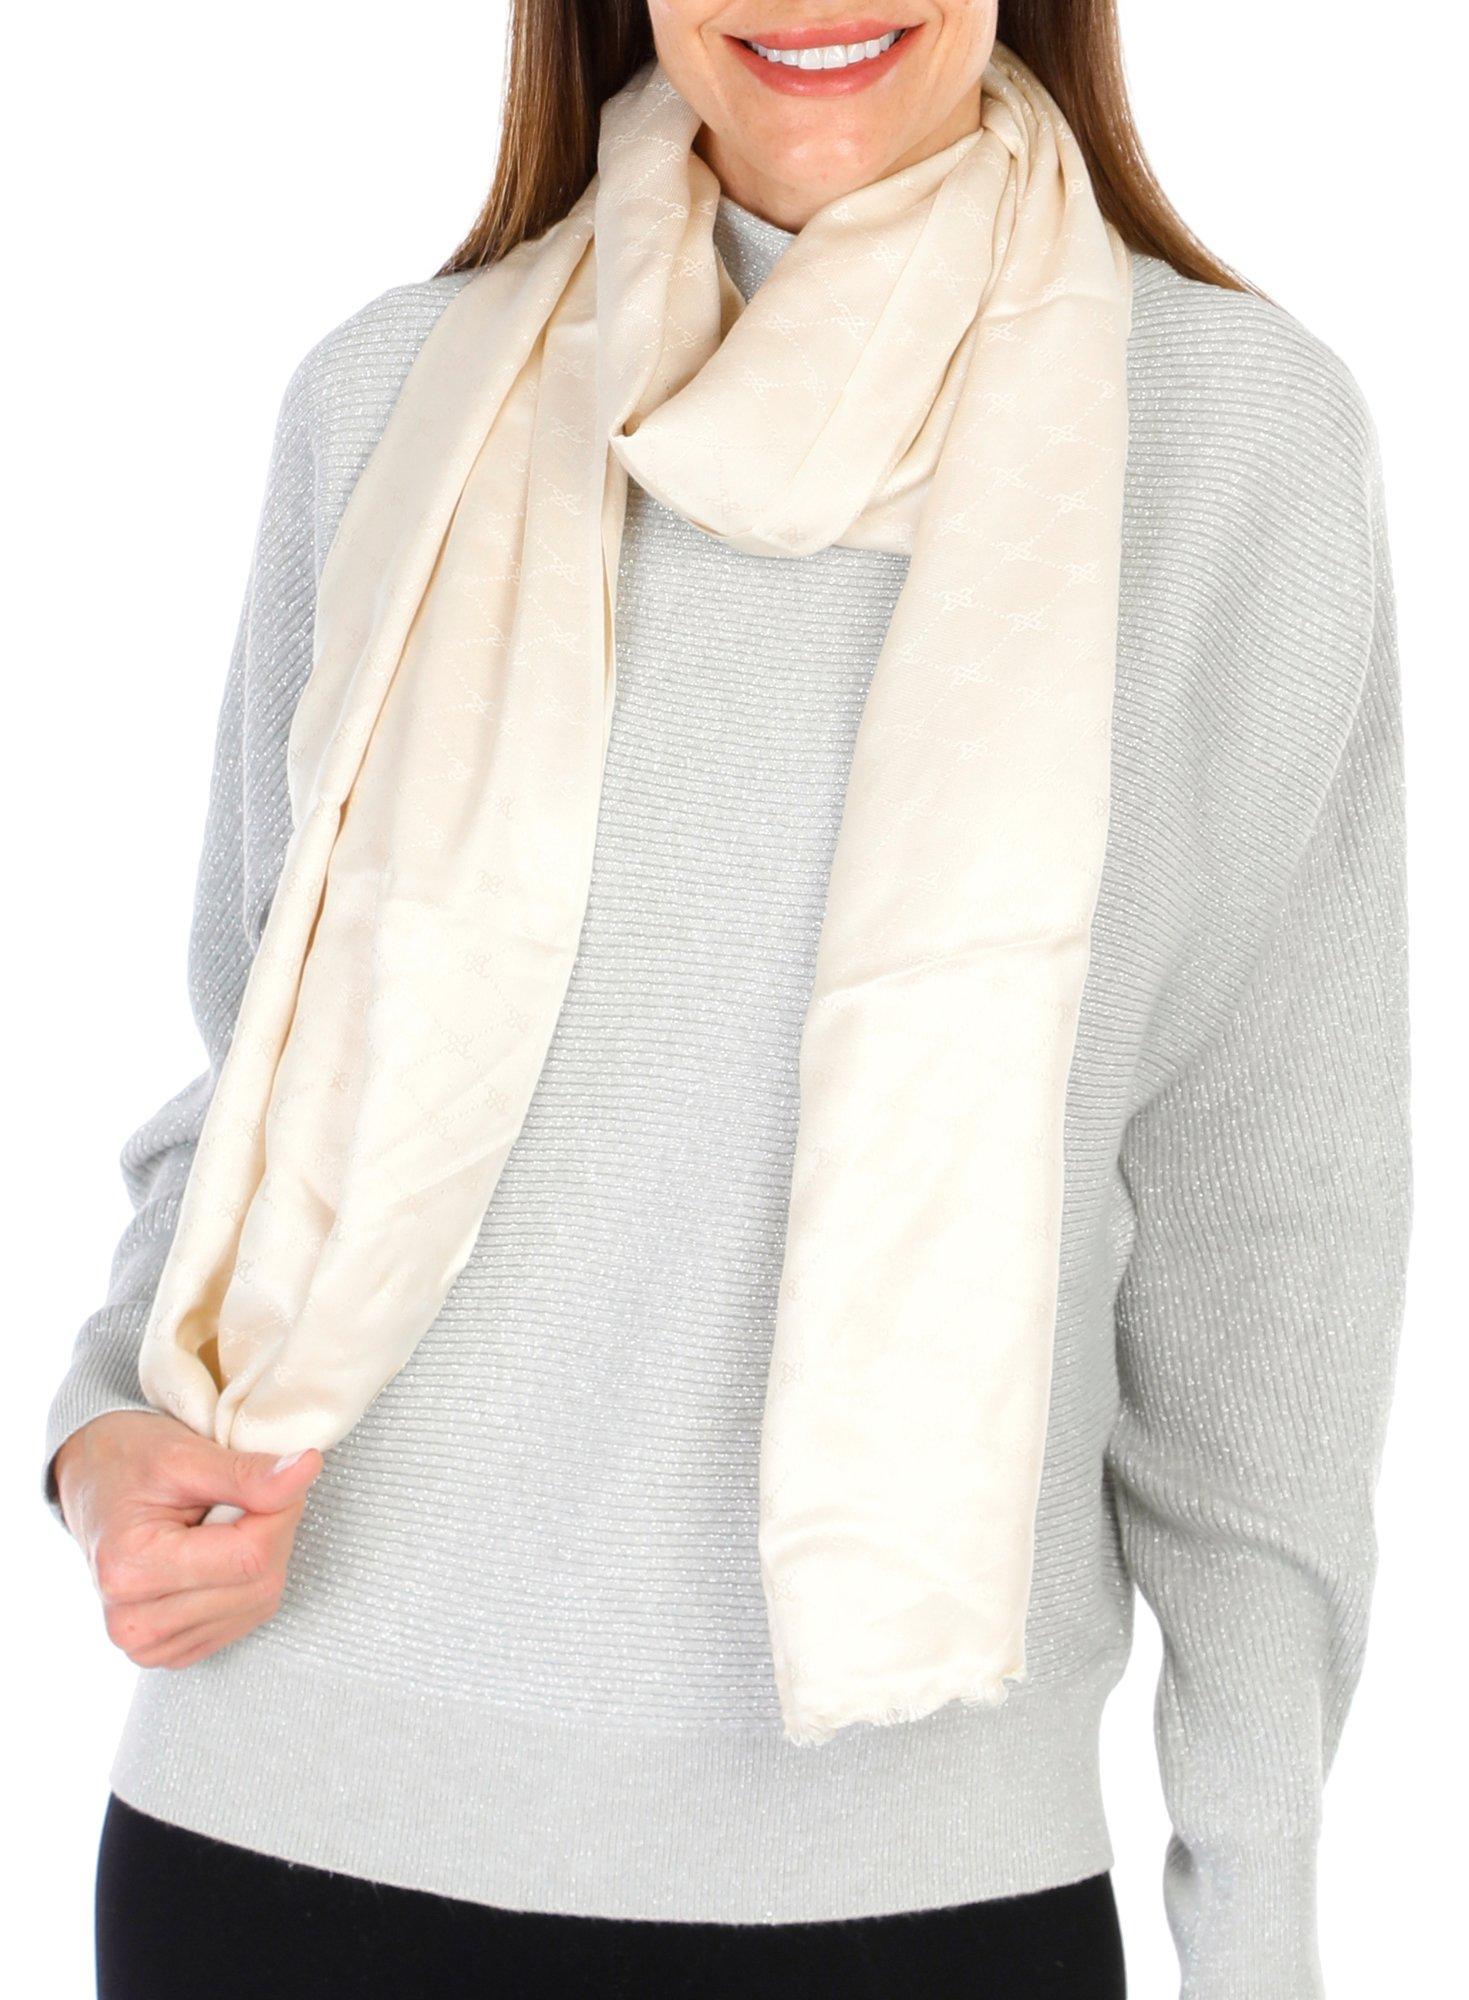 Women's Solid Pashmina Scarf